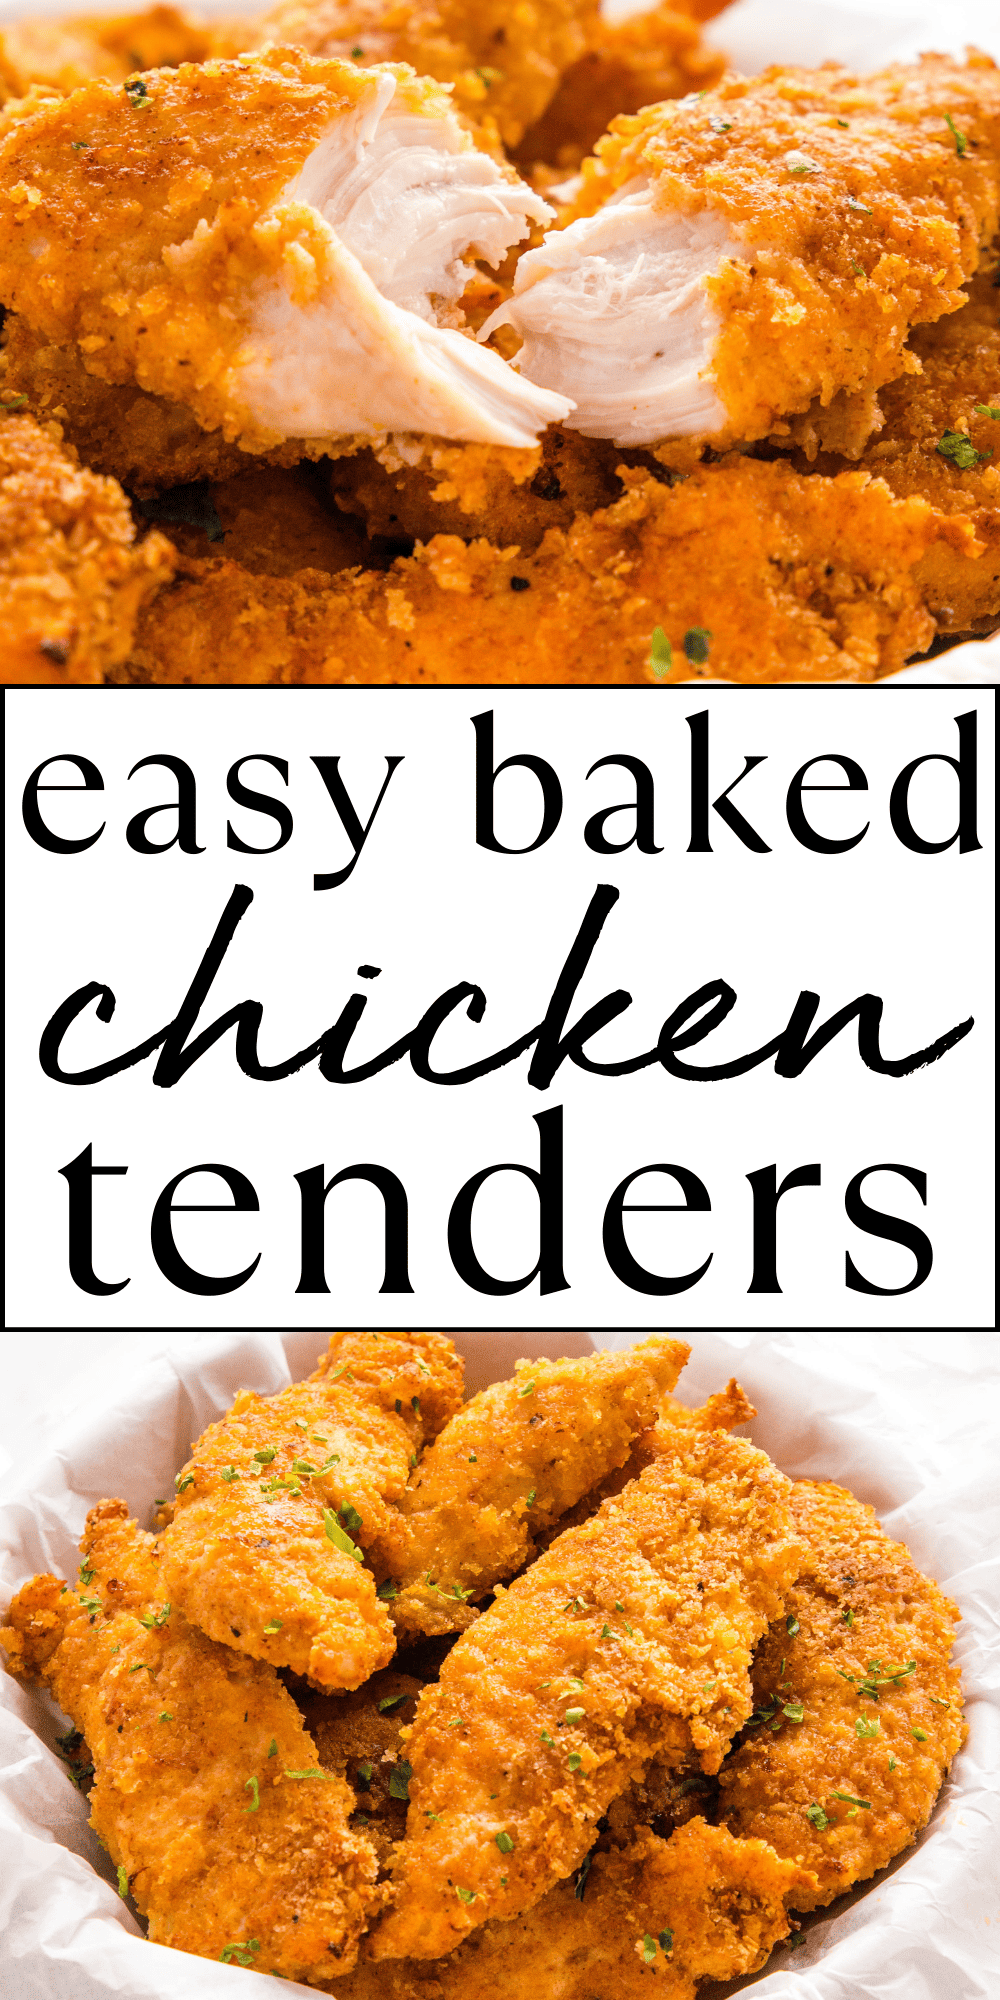 This Baked Chicken Tenders recipe is the perfect way to enjoy that fried chicken taste without all the fat! They're baked to perfection with a crispy crust and the perfect blend of herbs and spices, and only about 400 calories per serving! Recipe from thebusybaker.ca! #ovenbakedchickentenders #healthychickentenders #healthychickenfingers #ovenfriedchicken via @busybakerblog